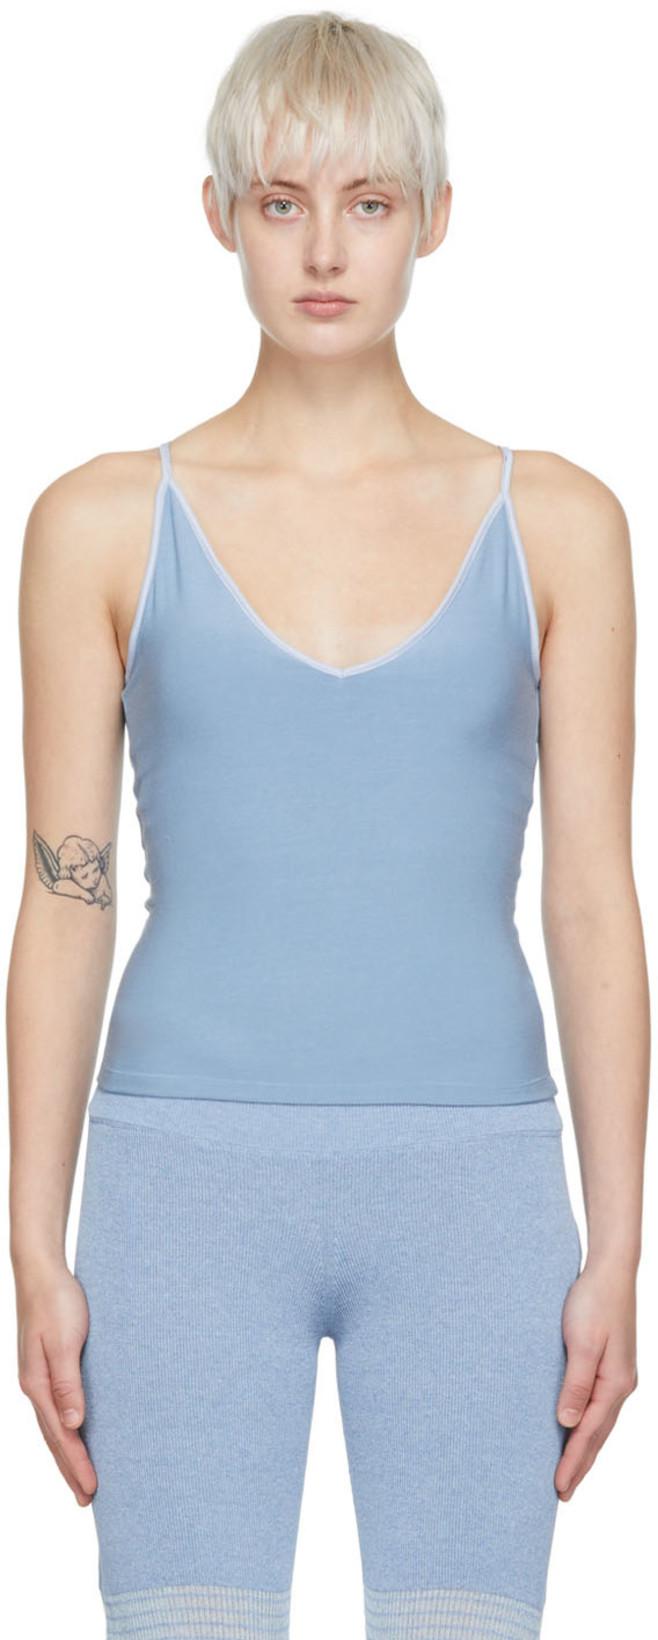 Blue Rayon Tank Top by DETERM;